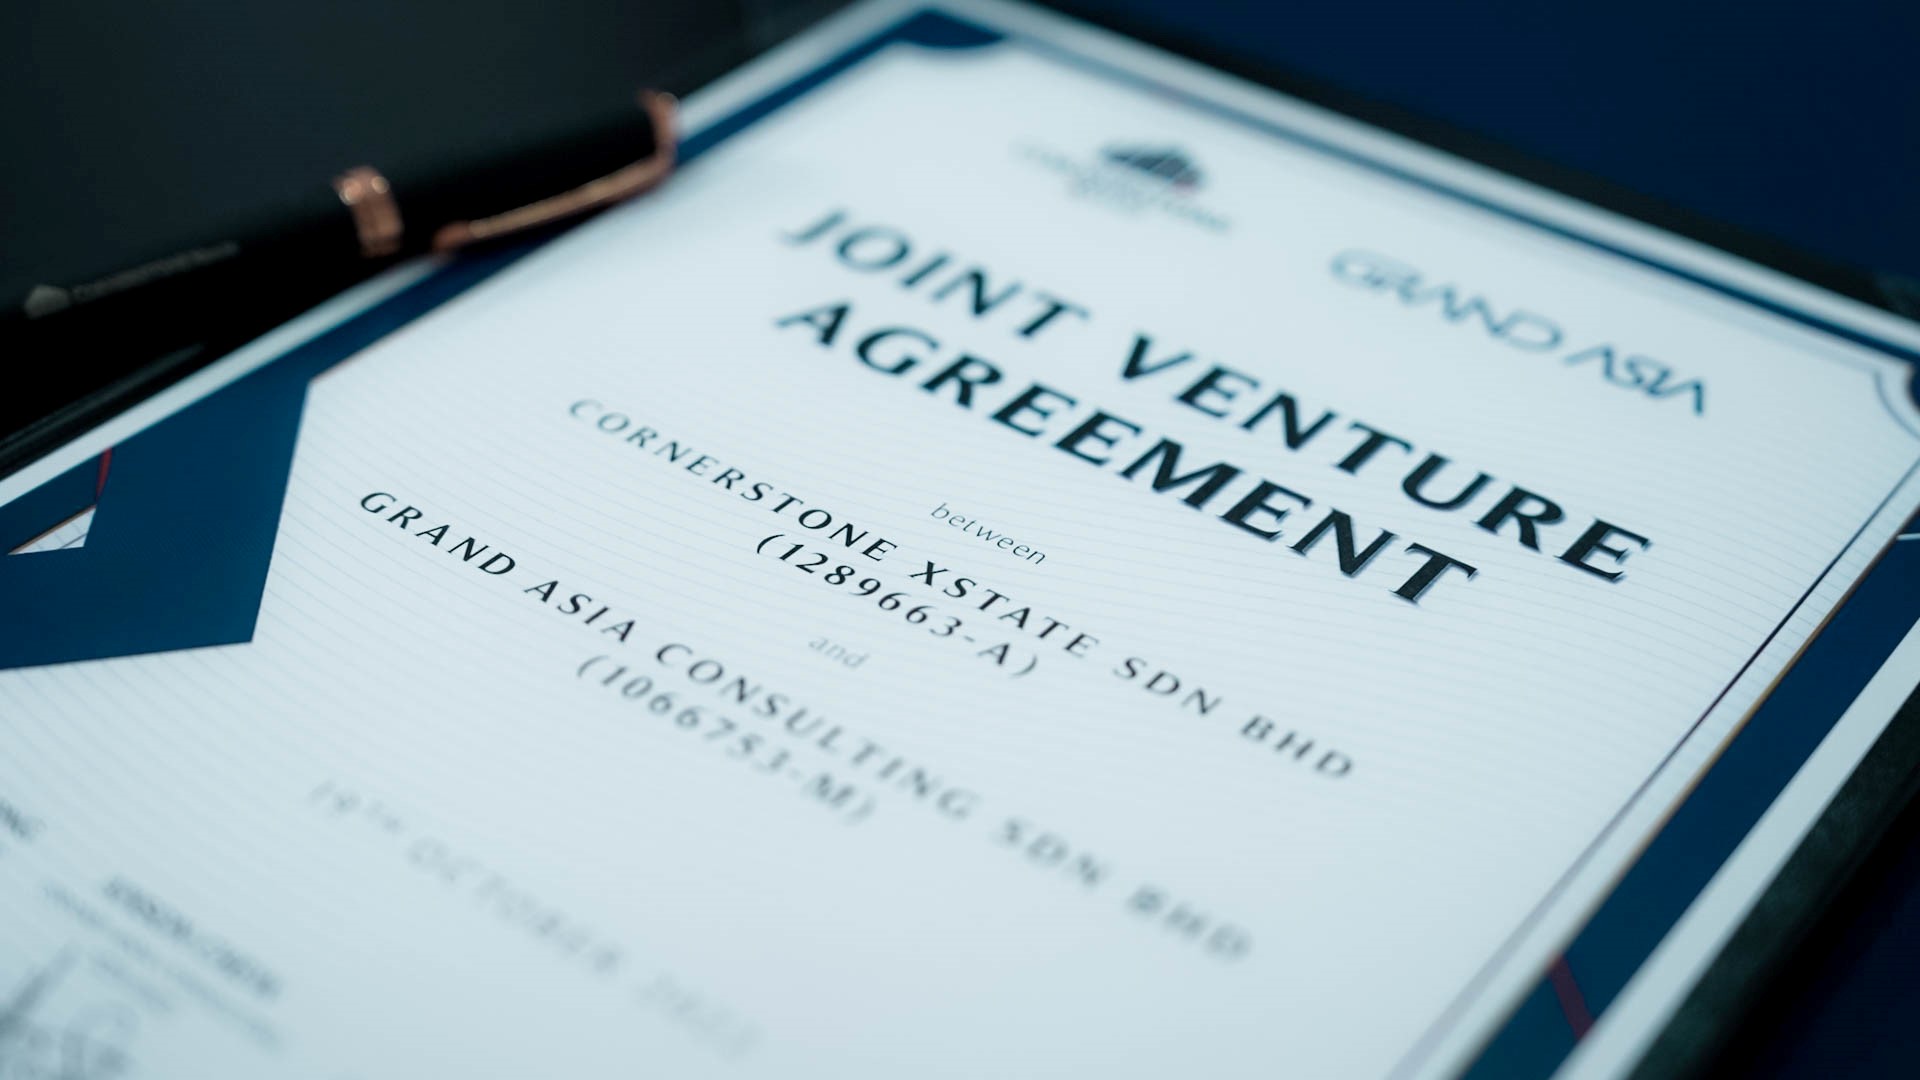 joint venture agreement